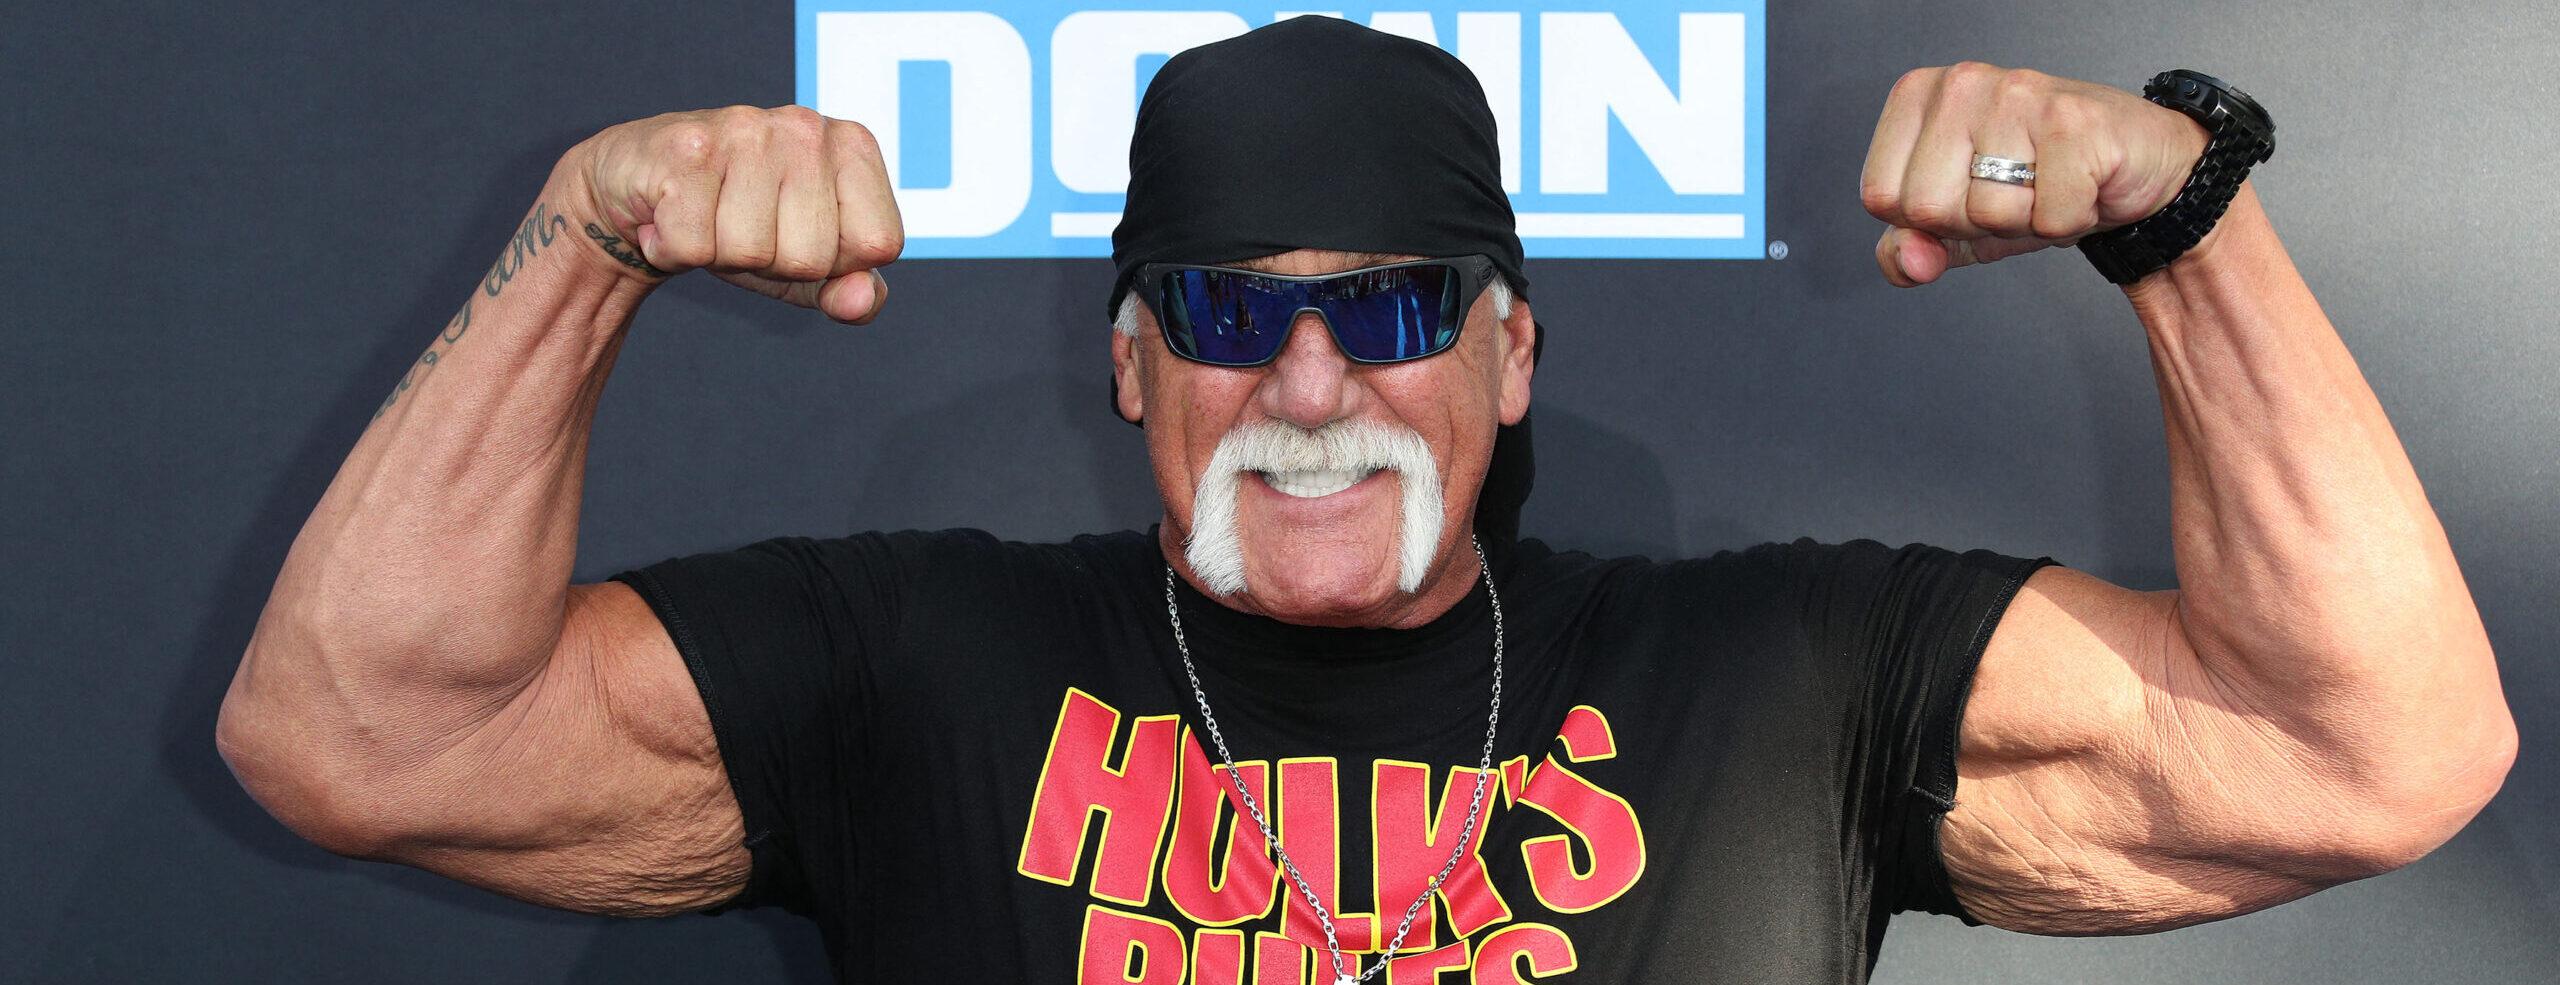 Hulk Hogan’s Son Arrested For DUI After Refusing Sobriety Test